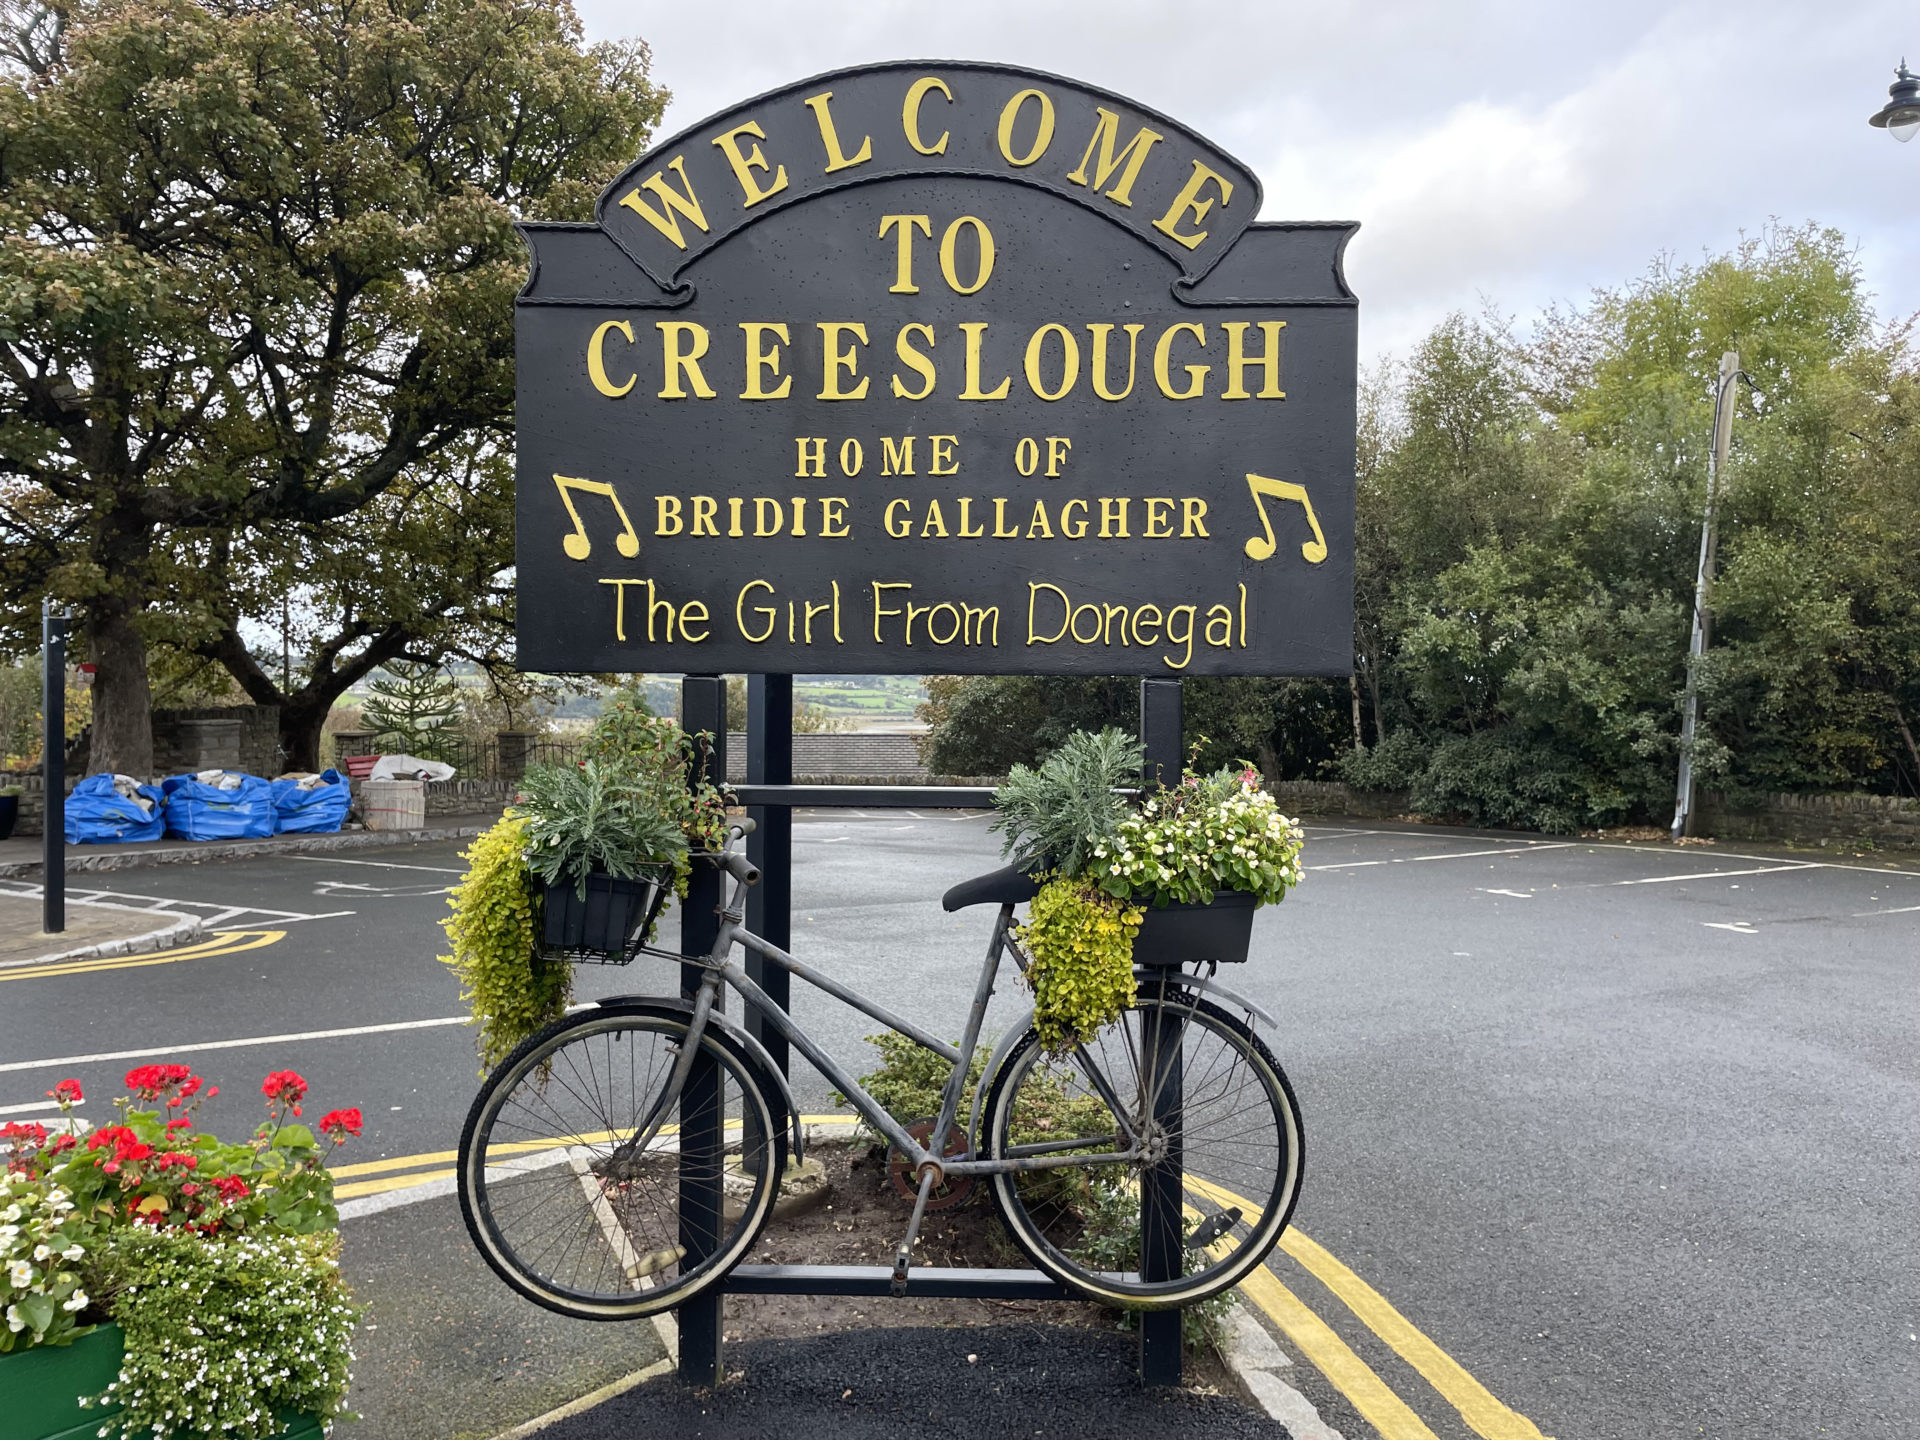 A remembrance sign for Bridie Gallagher, the famous Irish Country singer, from Creeslough in Donegal